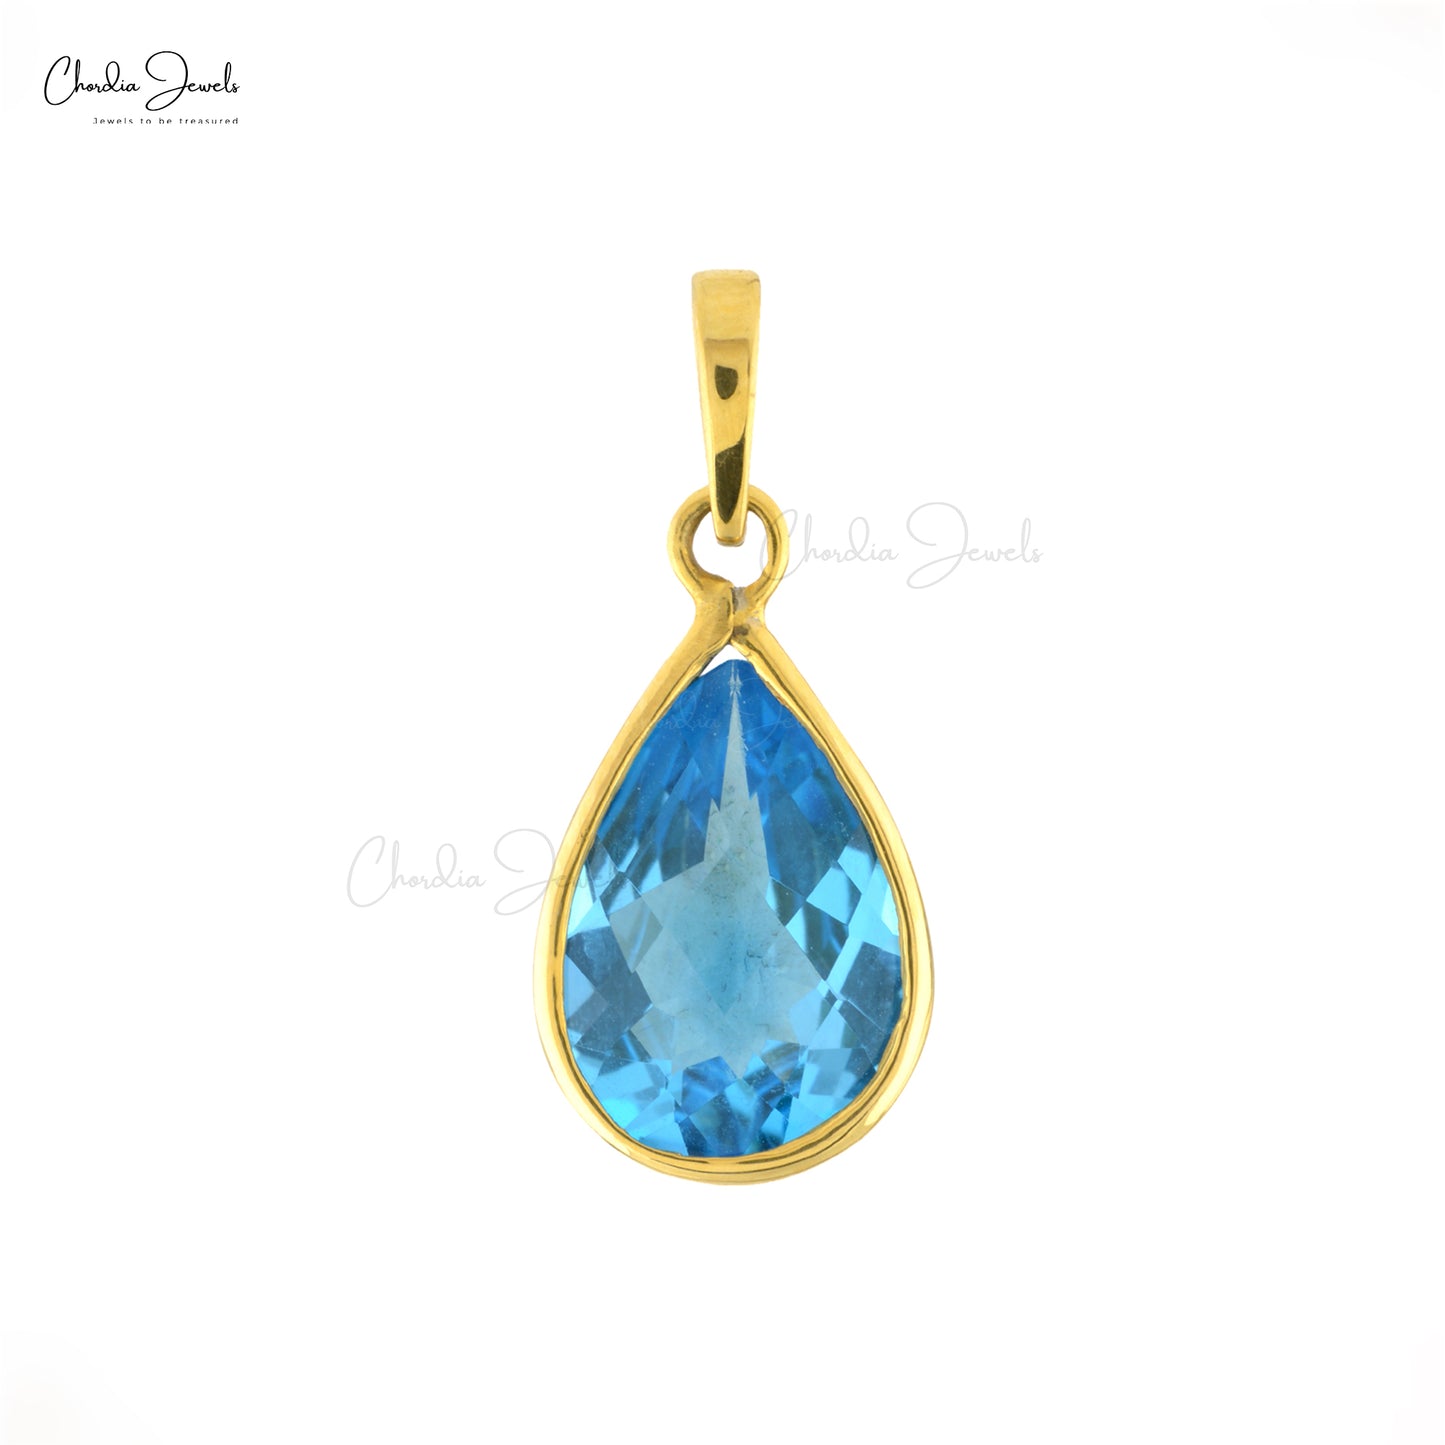 December Birthstone Natural Swiss Blue Topaz Solitaire Pendant Pear Cut 9x6mm Gemstone Pendant 14k Solid Yellow Gold Pendant For Women's